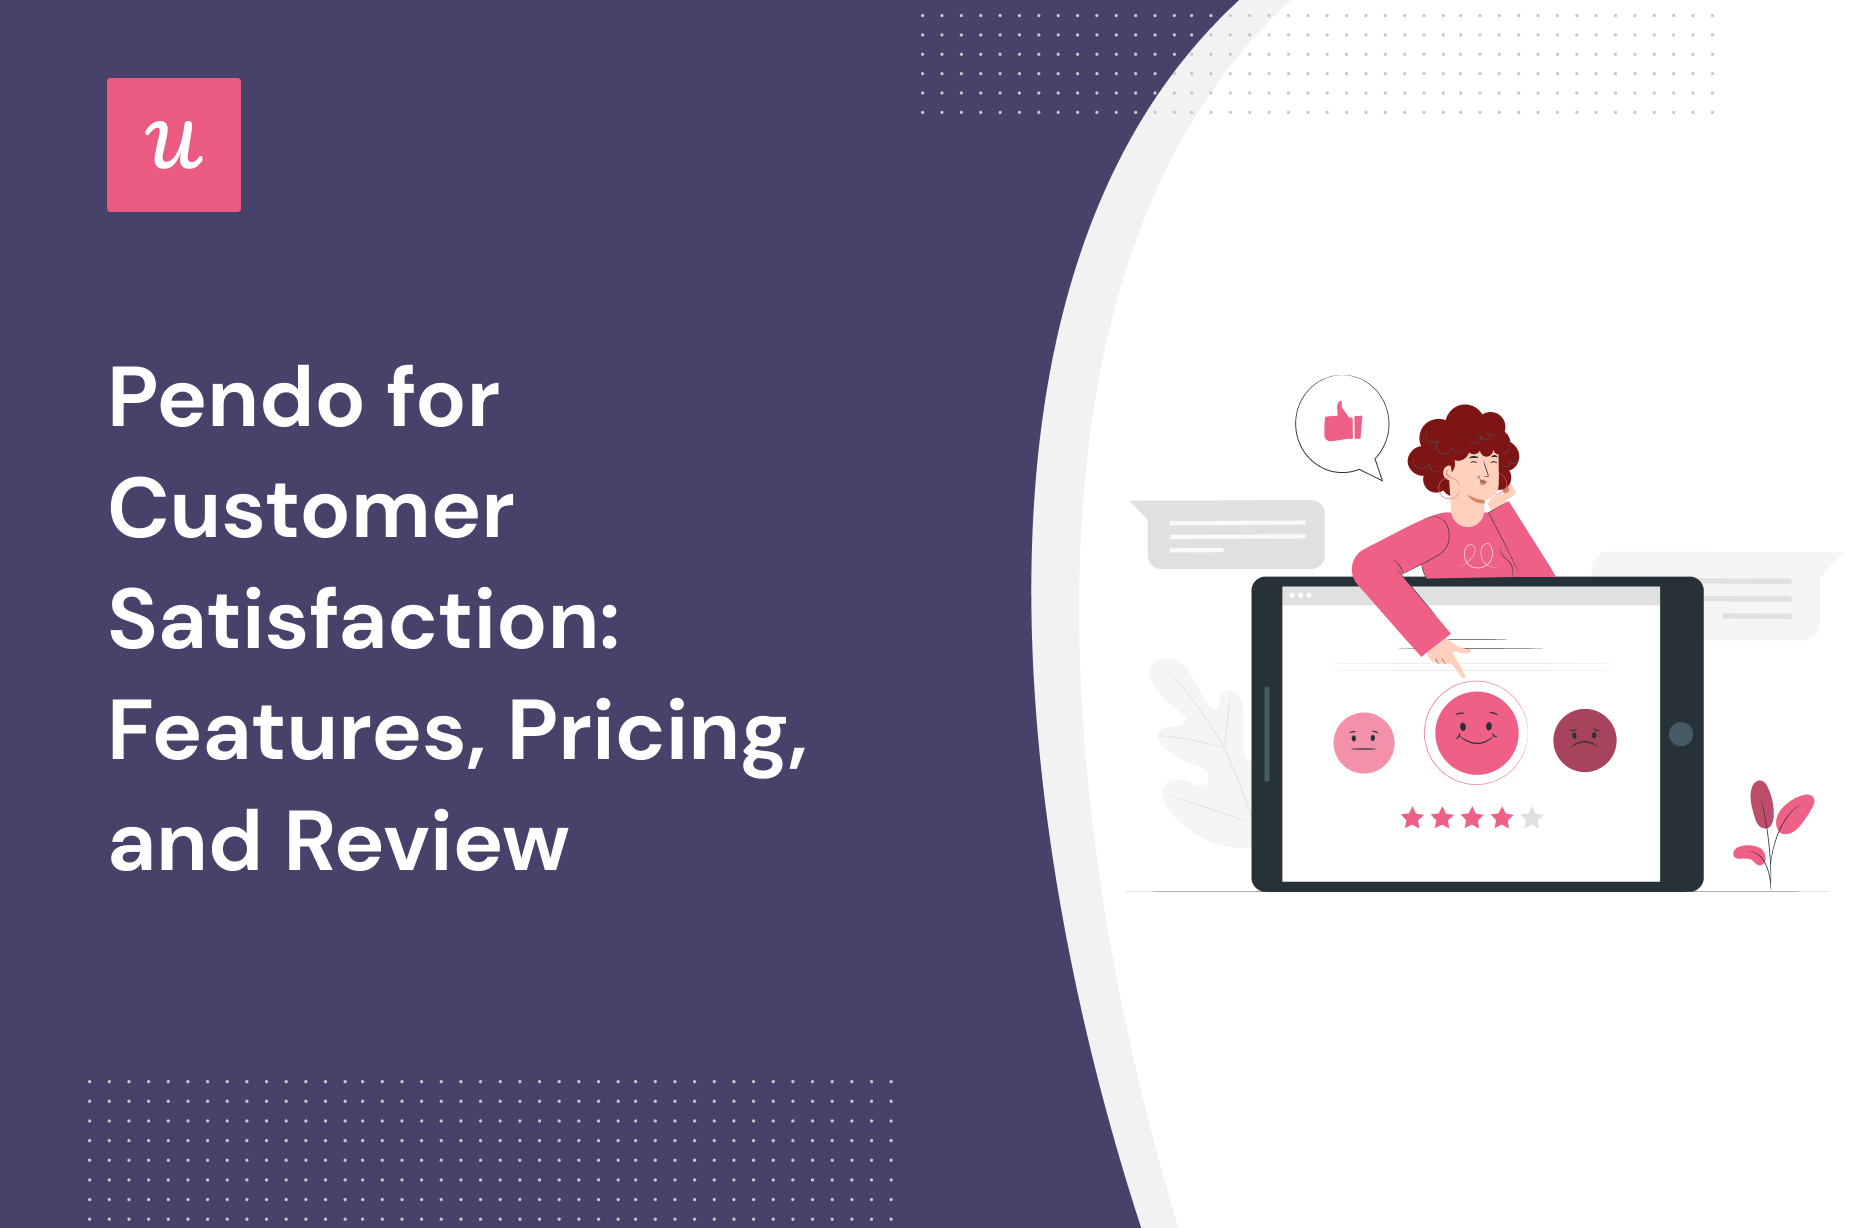 Pendo for Customer Satisfaction: Features, Pricing, and Review